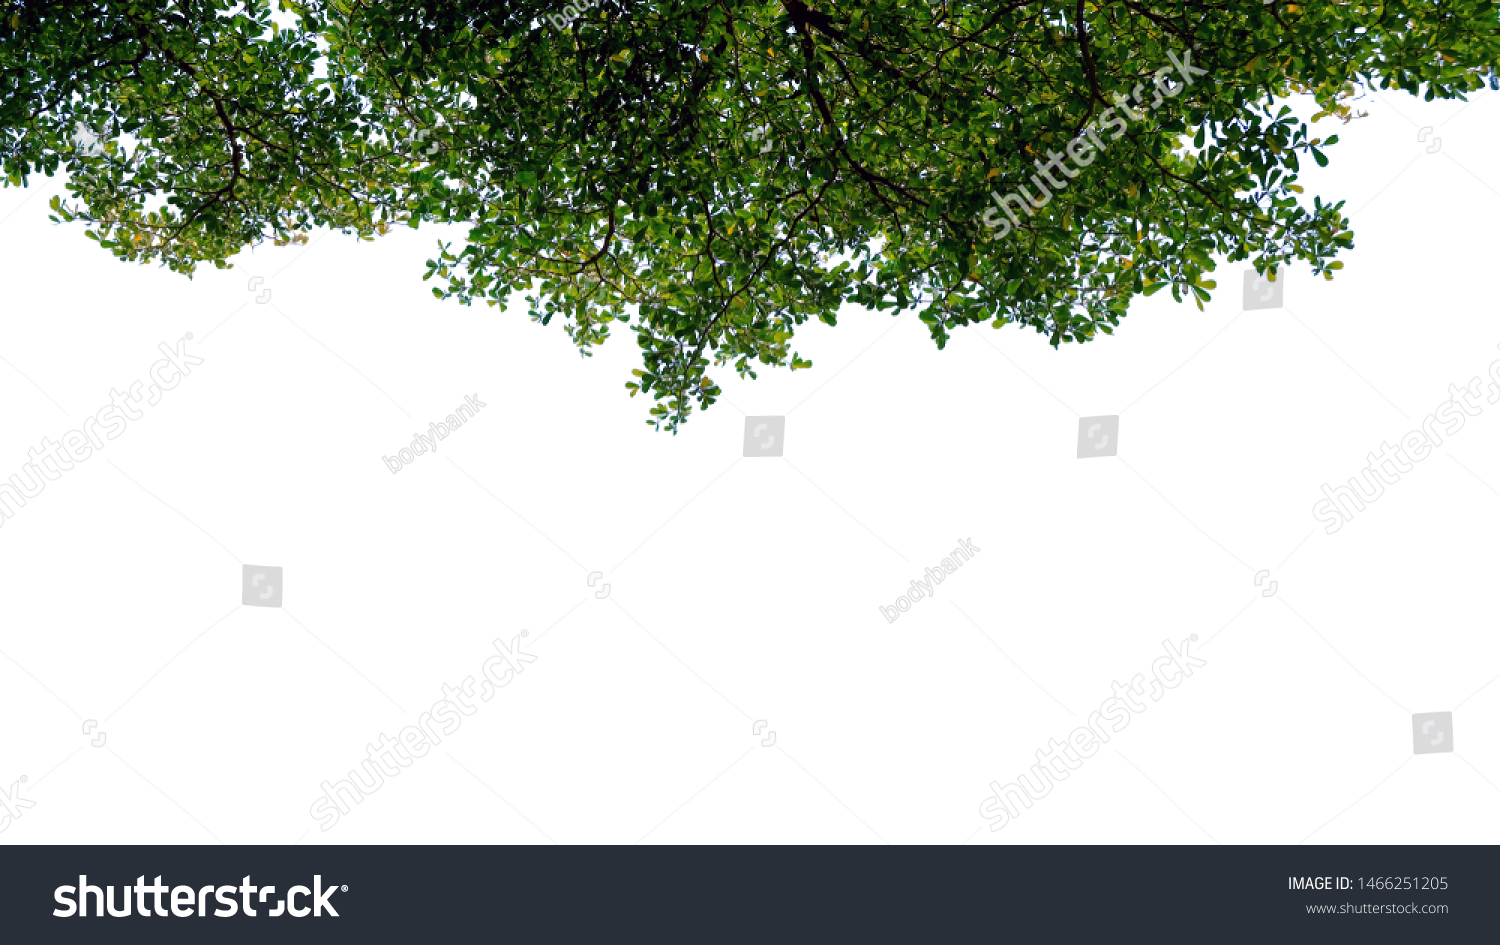 Green tree leaves and branches with raindrops isolated on white background, can be used for display or montage your products #1466251205